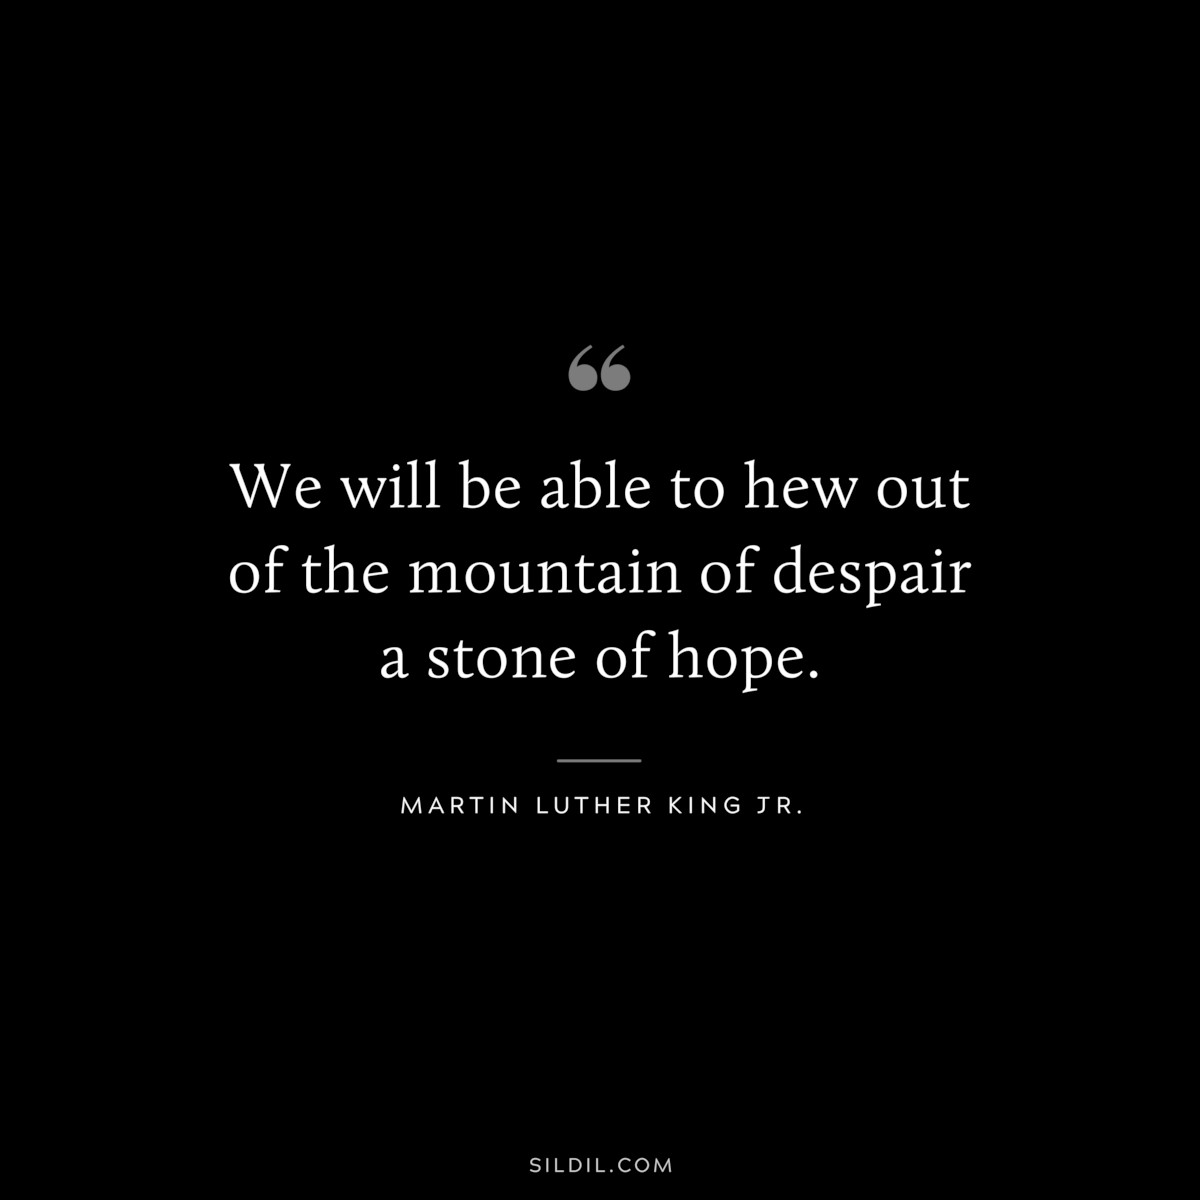 We will be able to hew out of the mountain of despair a stone of hope. ― Martin Luther King Jr.